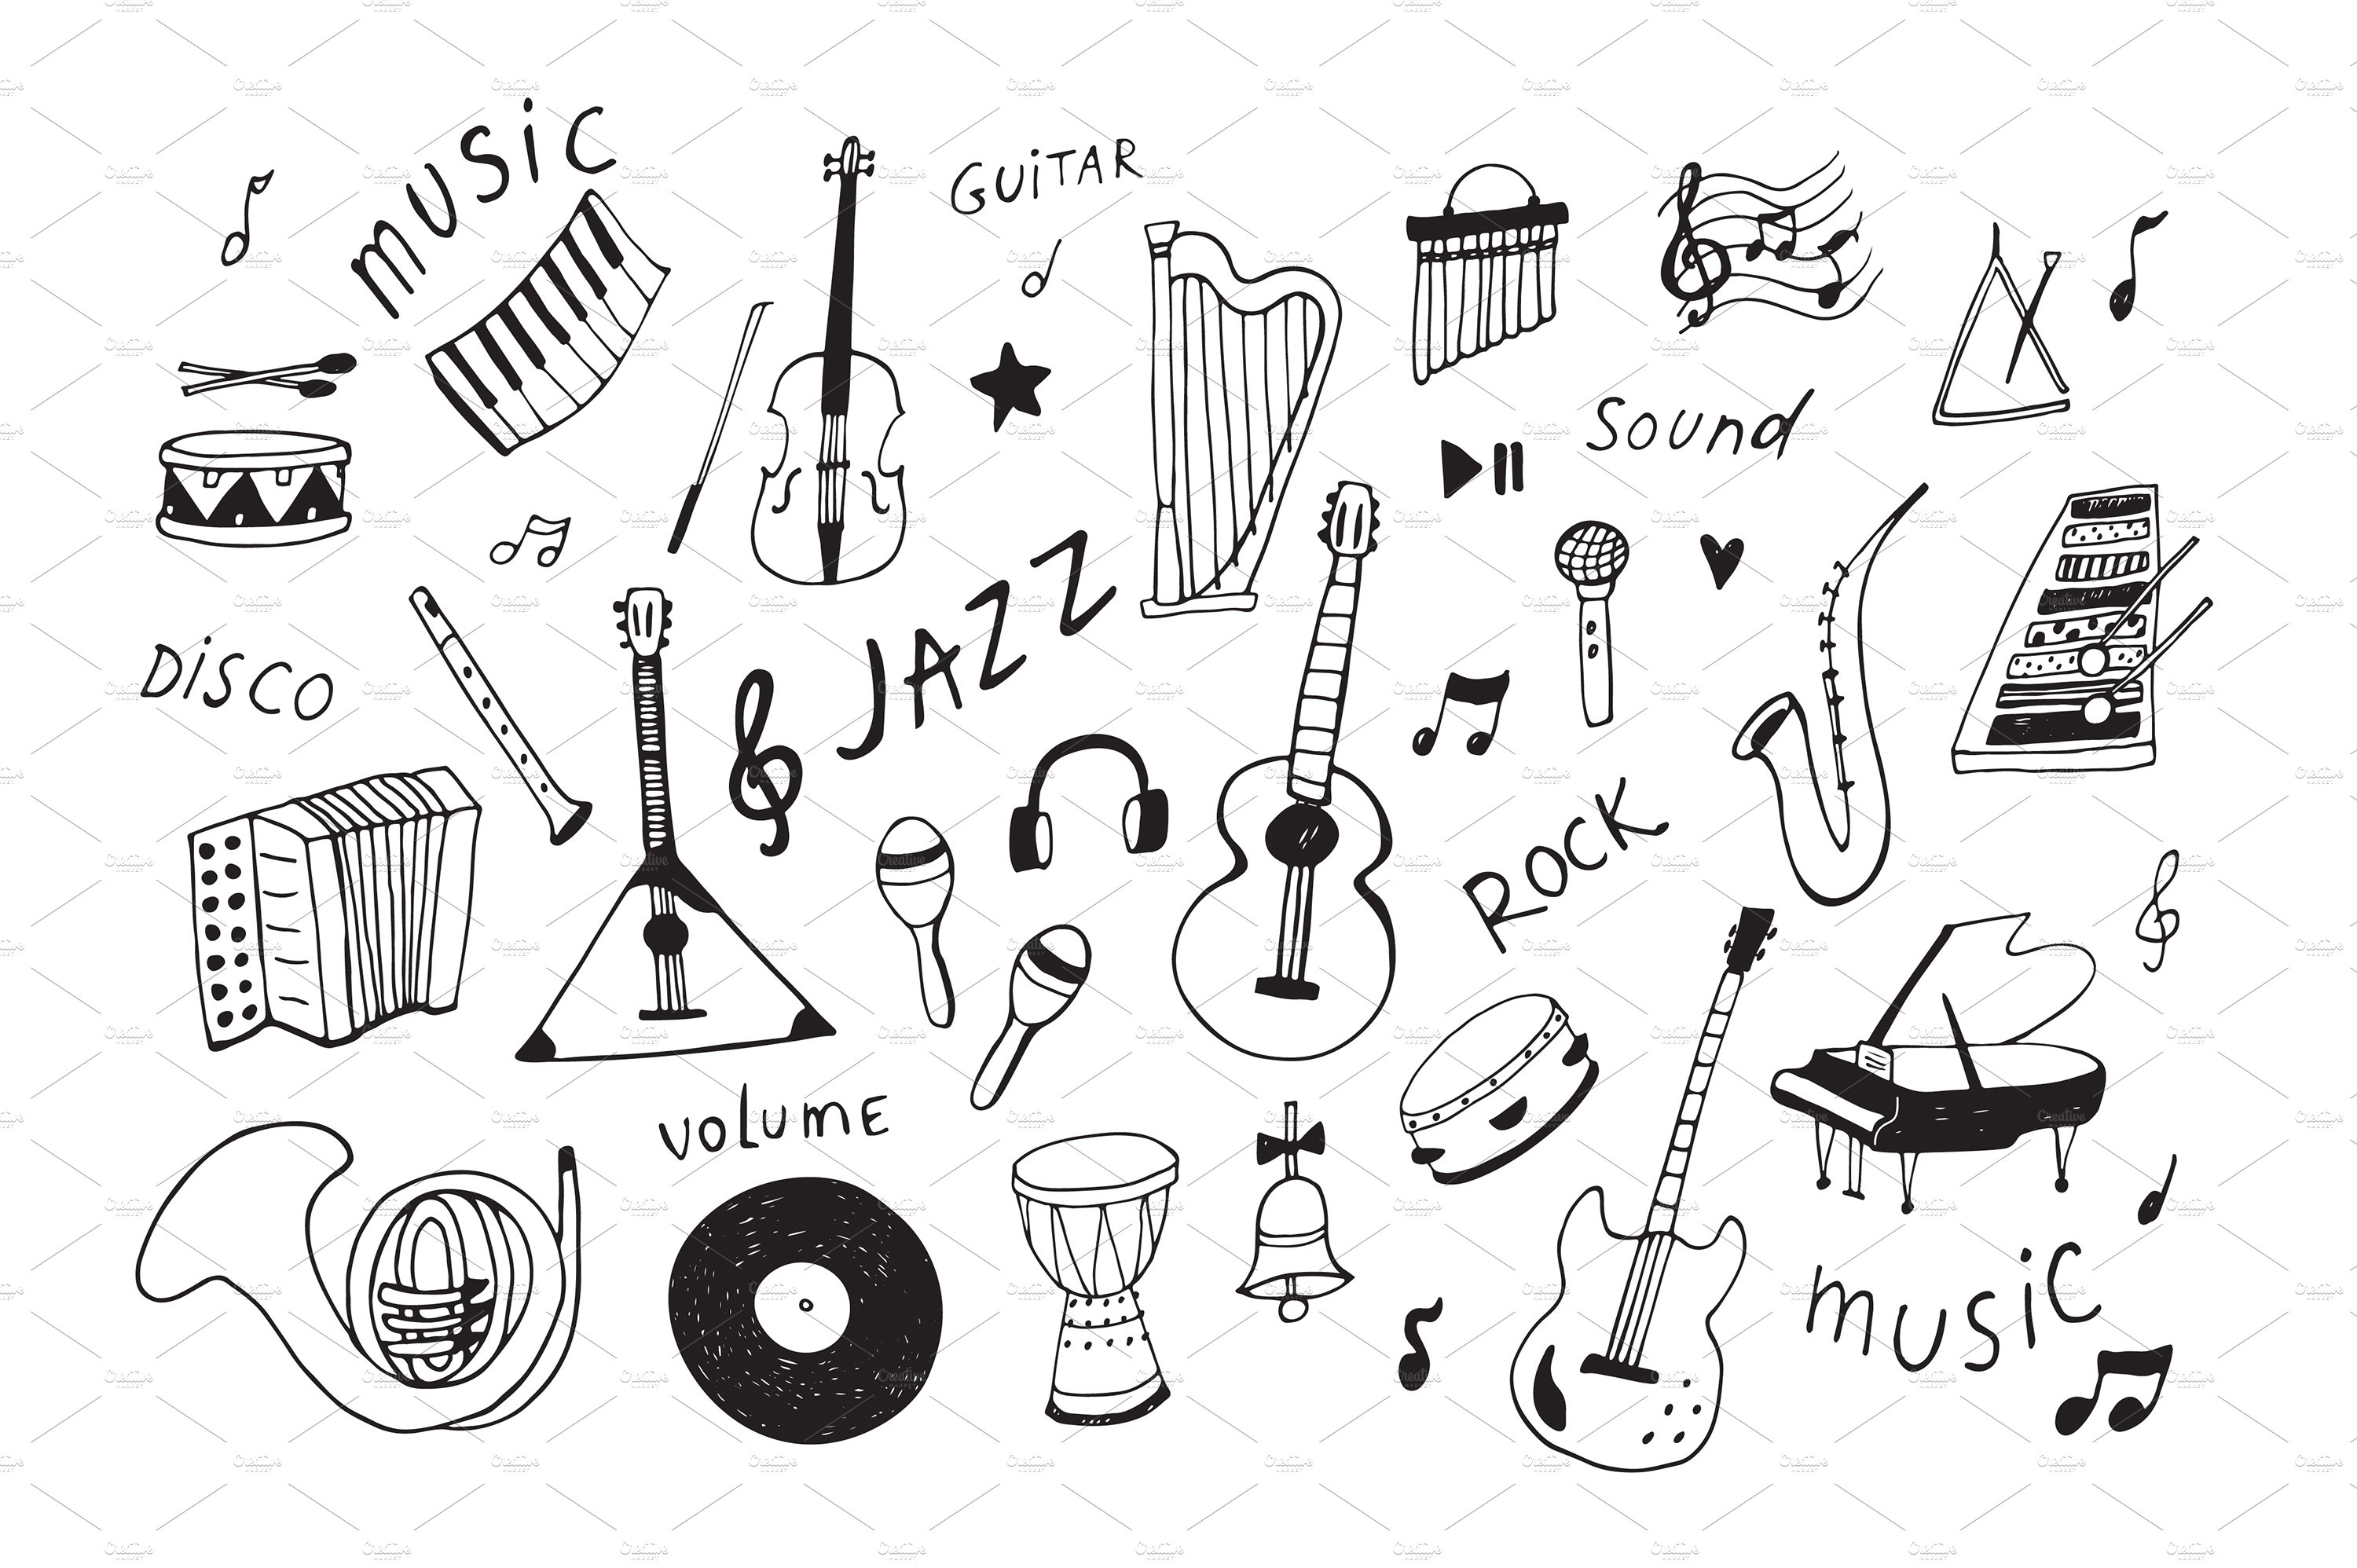 Outline musical instruments for your illustrations.